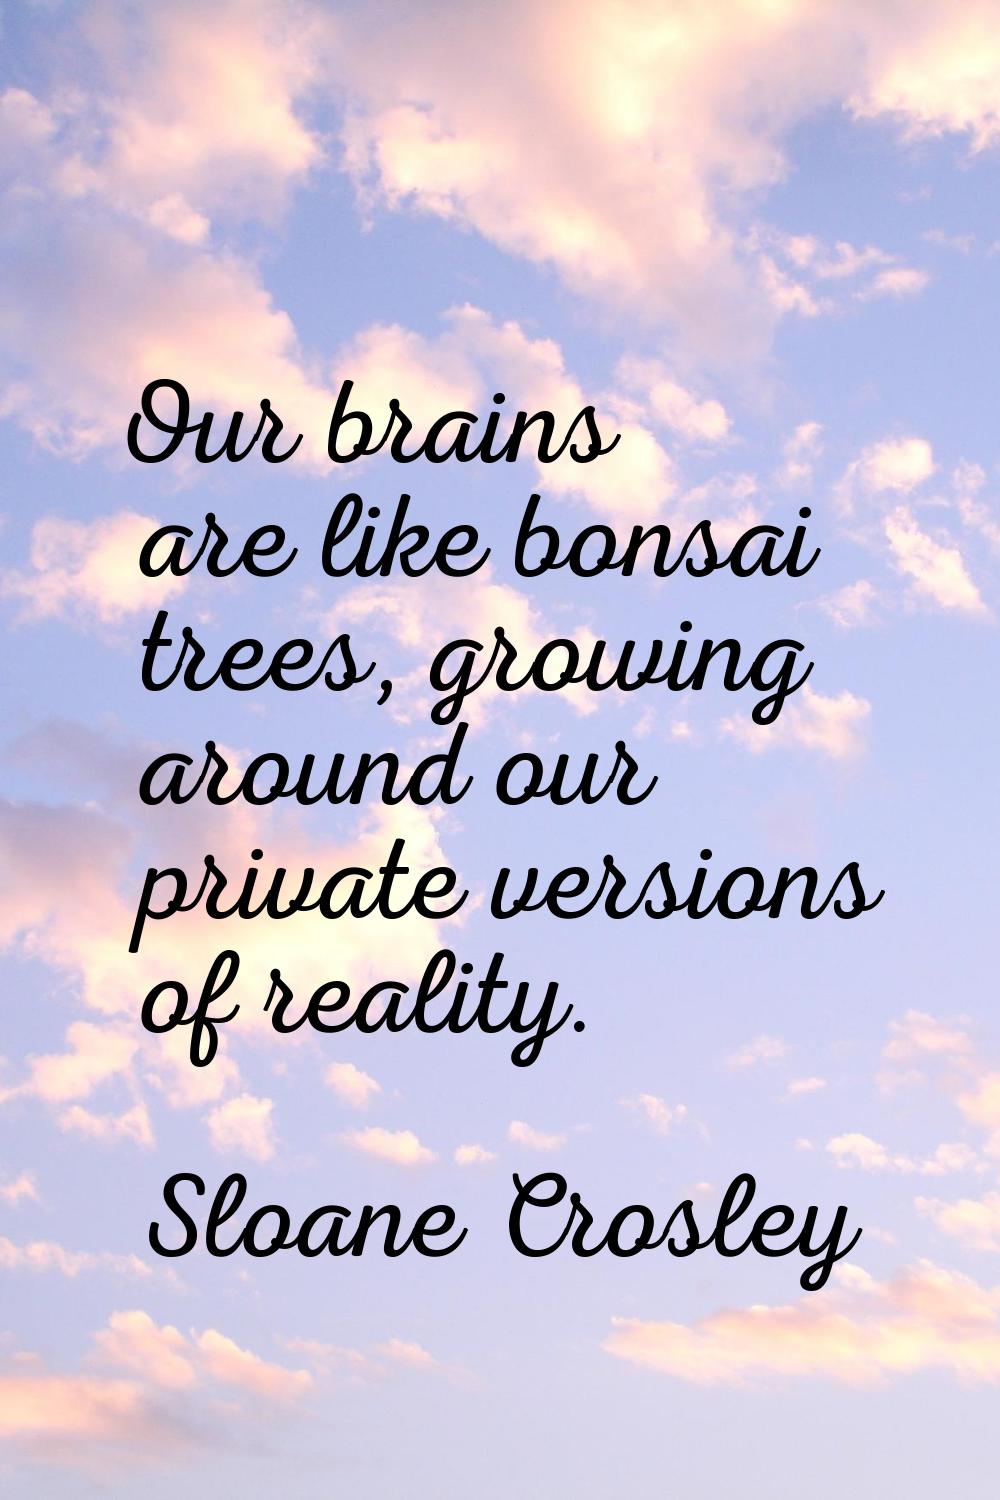 Our brains are like bonsai trees, growing around our private versions of reality.